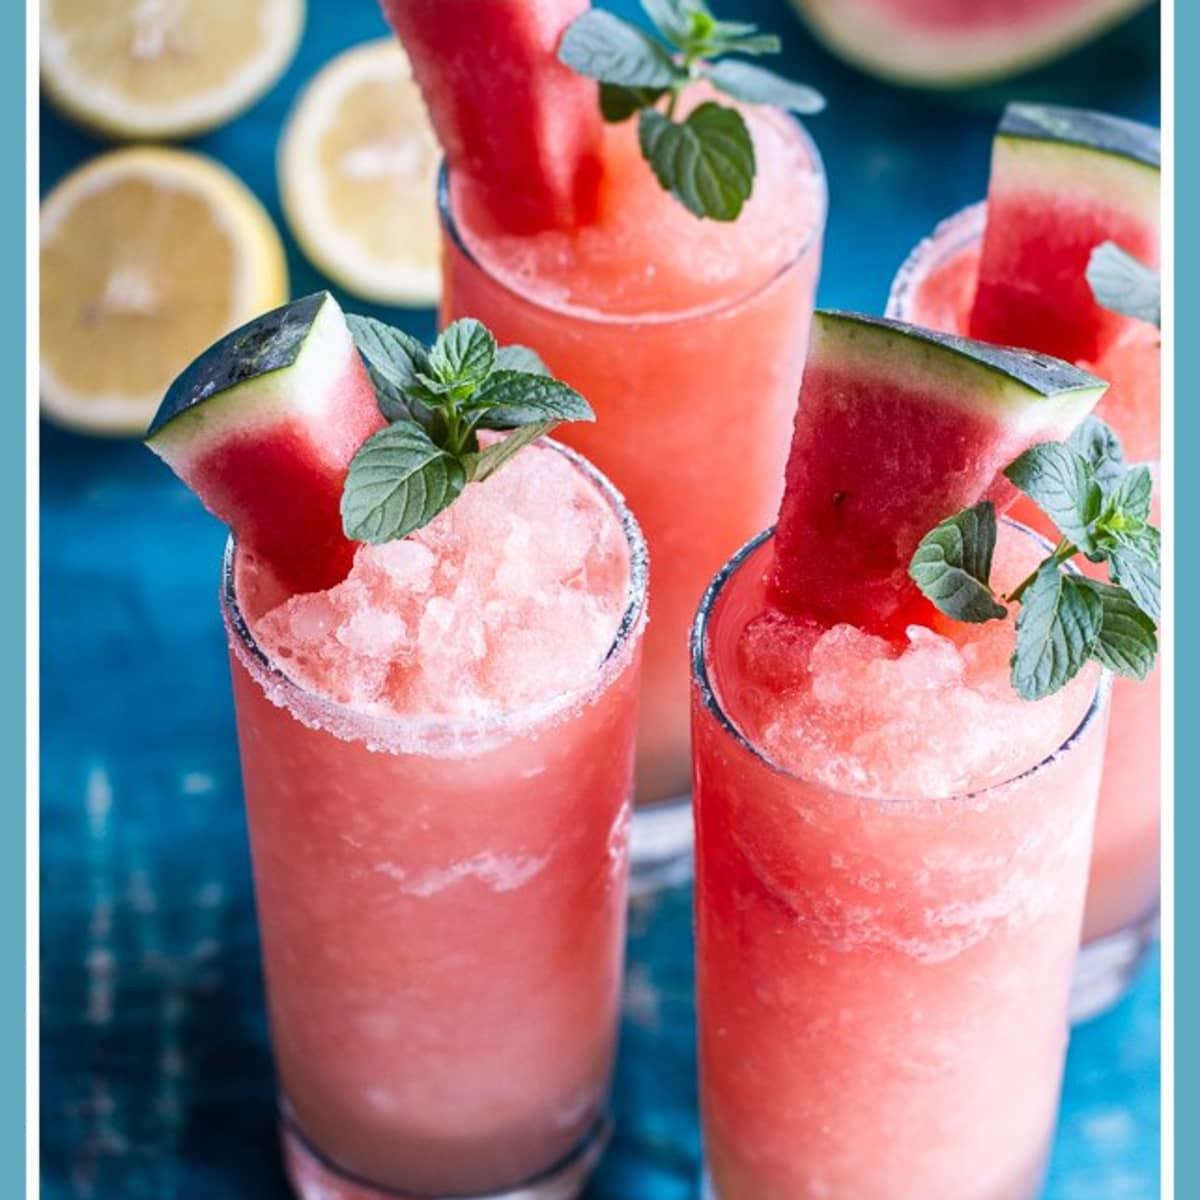 Watermelon Vodka Cocktail made with Blended Fresh Watermelon